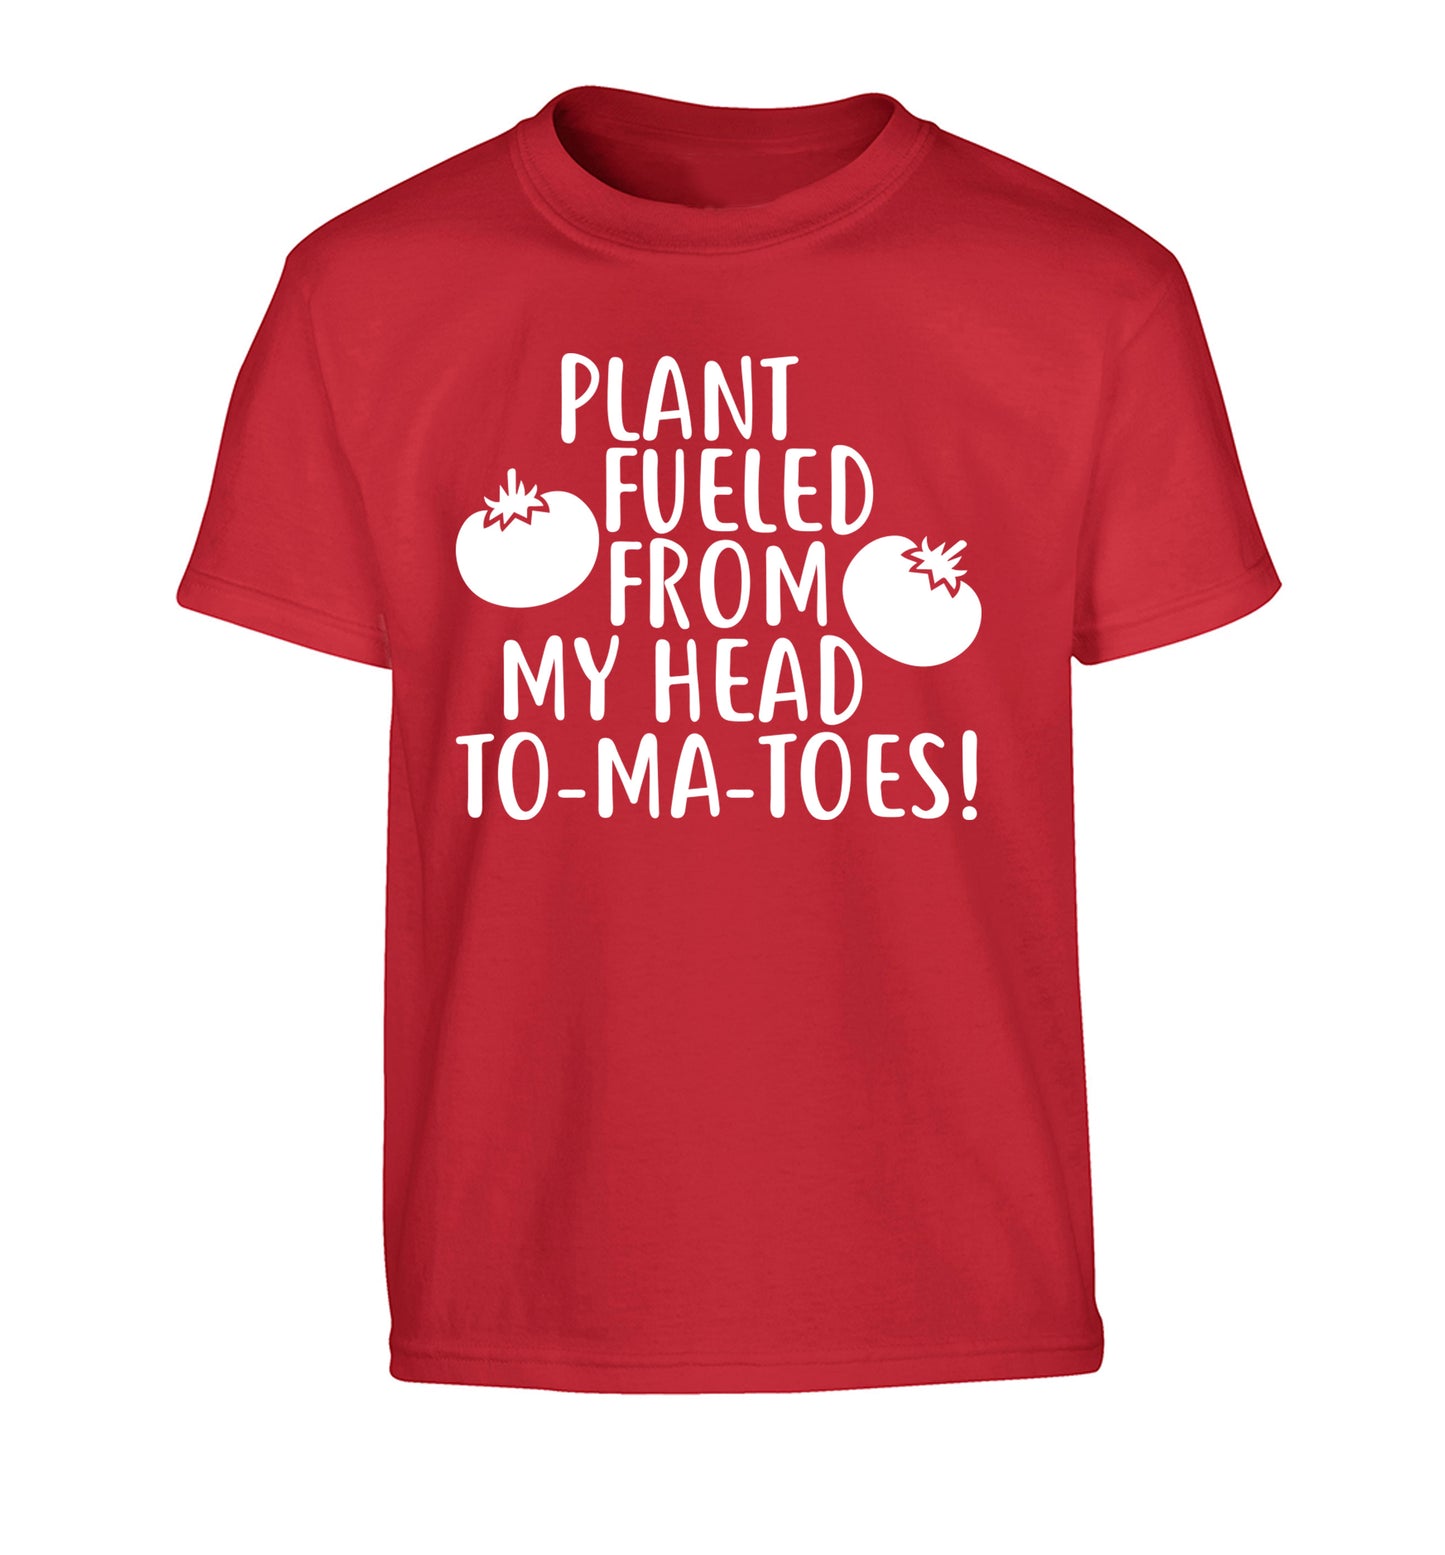 Plant fueled from my head to-ma-toes Children's red Tshirt 12-14 Years